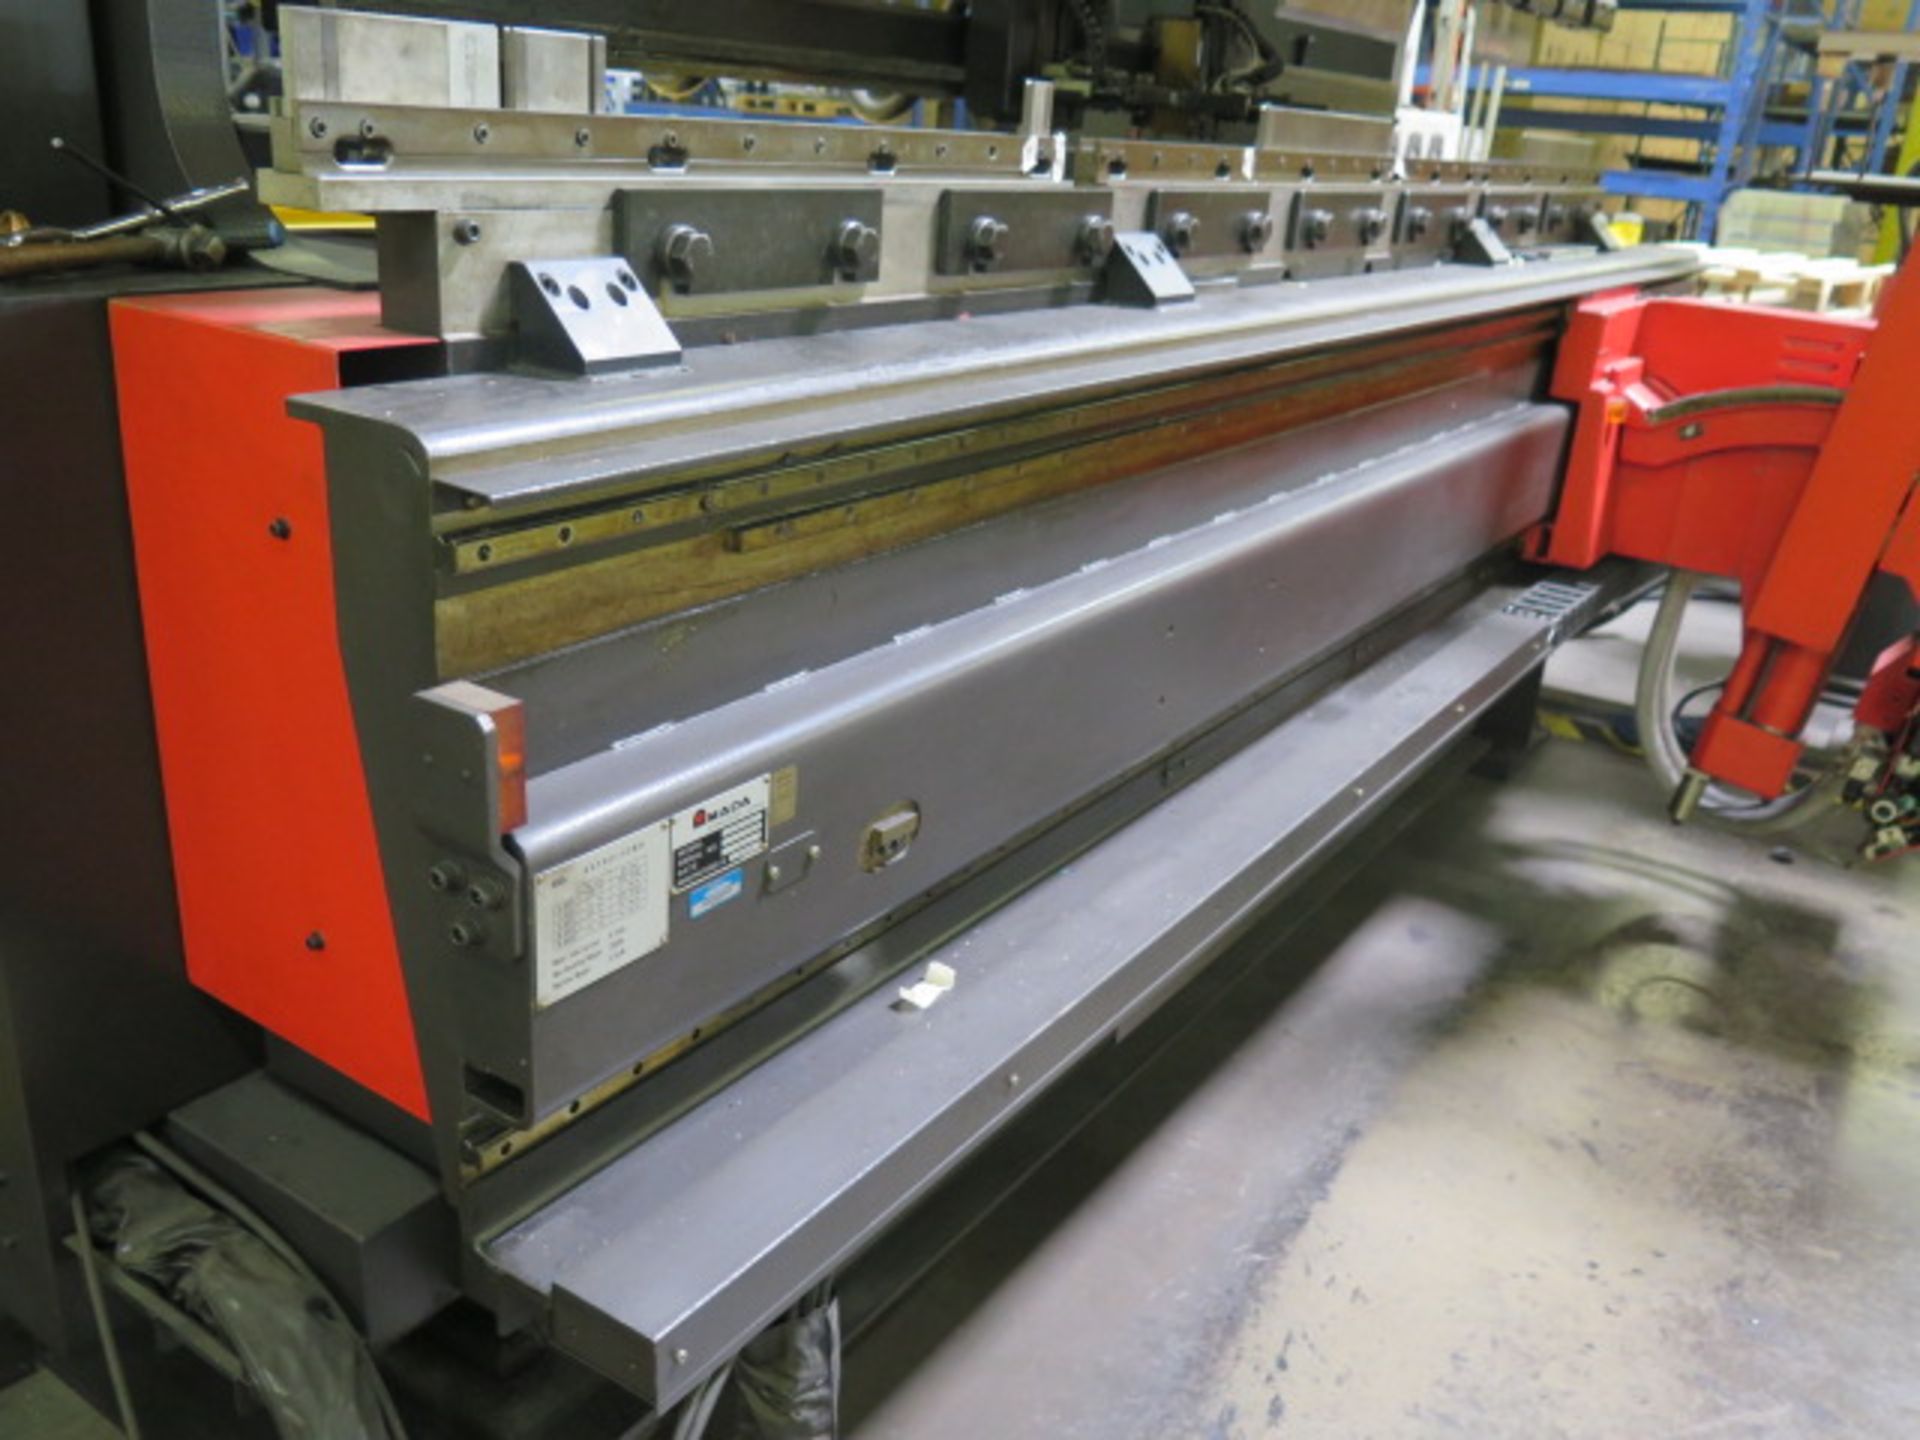 2000 Amada ASTRO-100 mdl.FcxB III-1253 125 Ton x 10' CNC Robotic Bending Cell, SOLD AS IS - Image 24 of 46